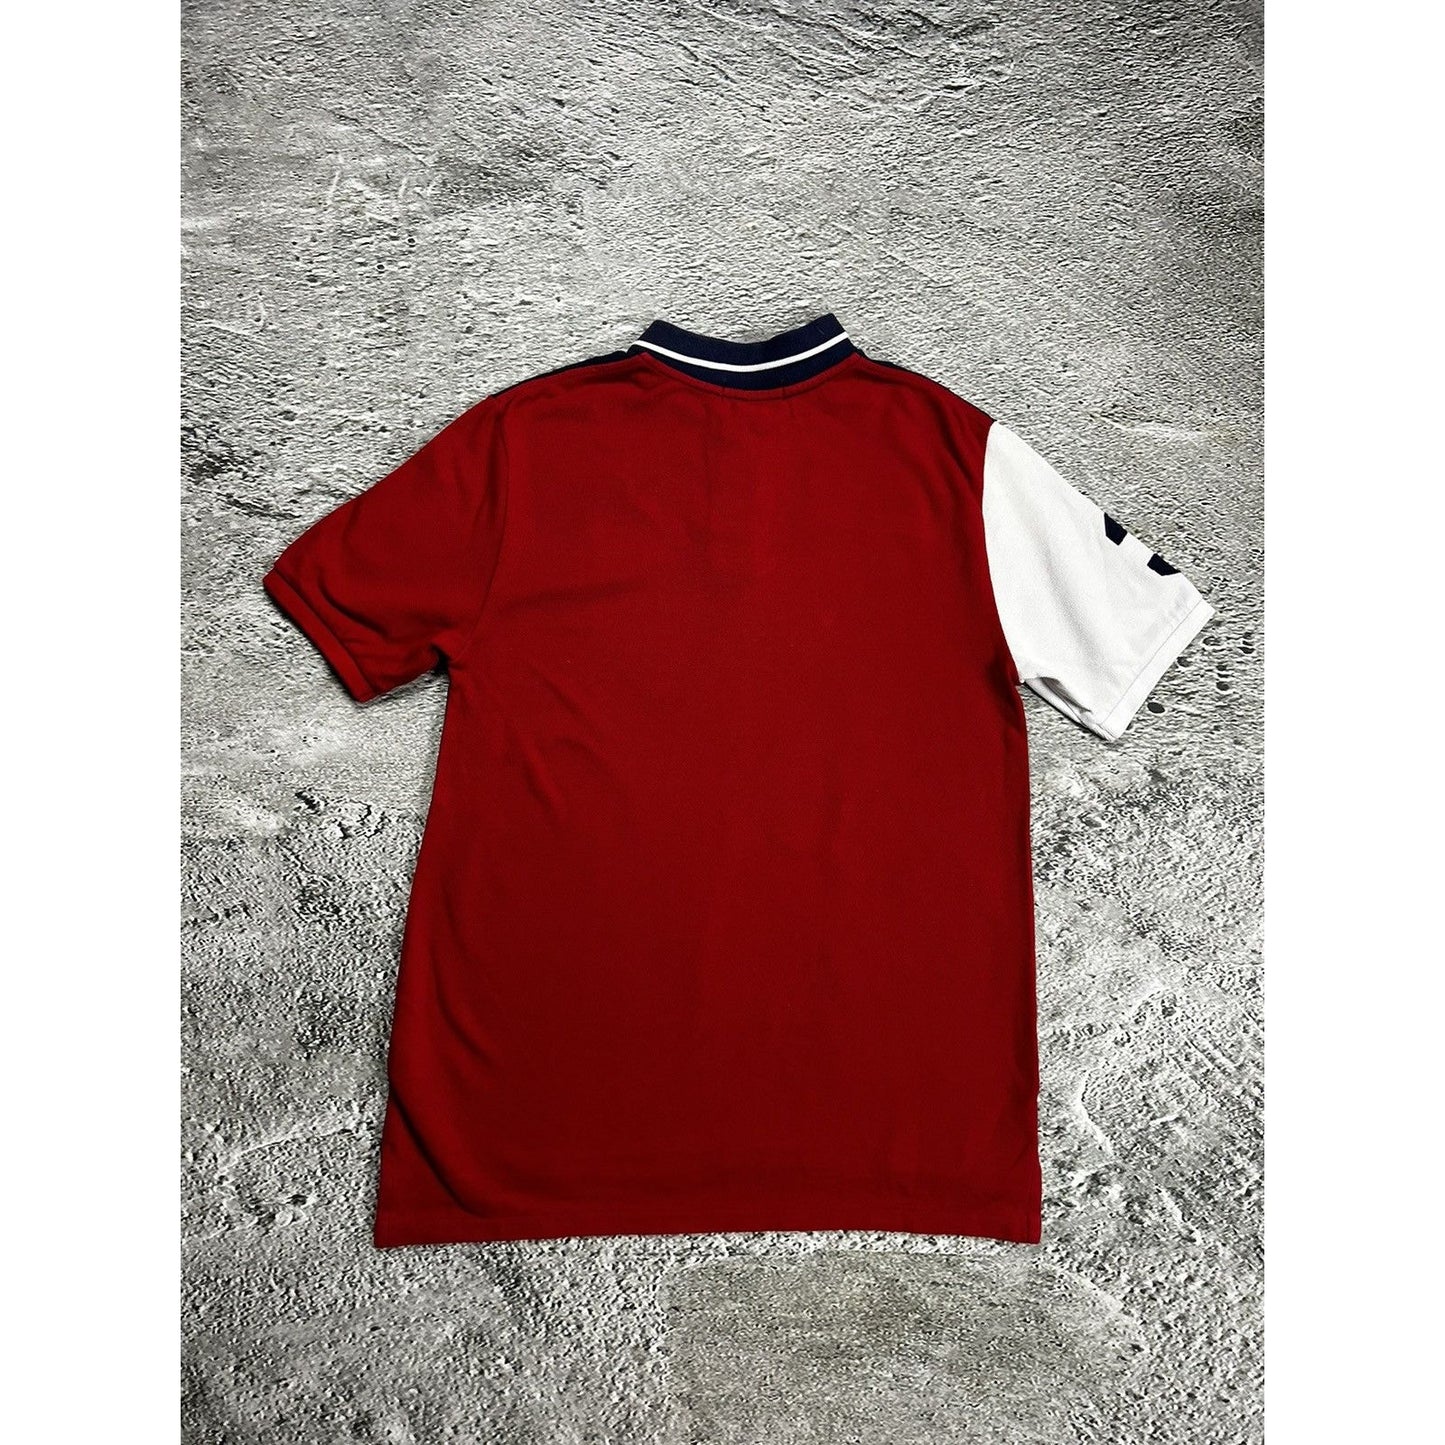 Chief Keef Polo Ralph Lauren vintage USA big pony navy red